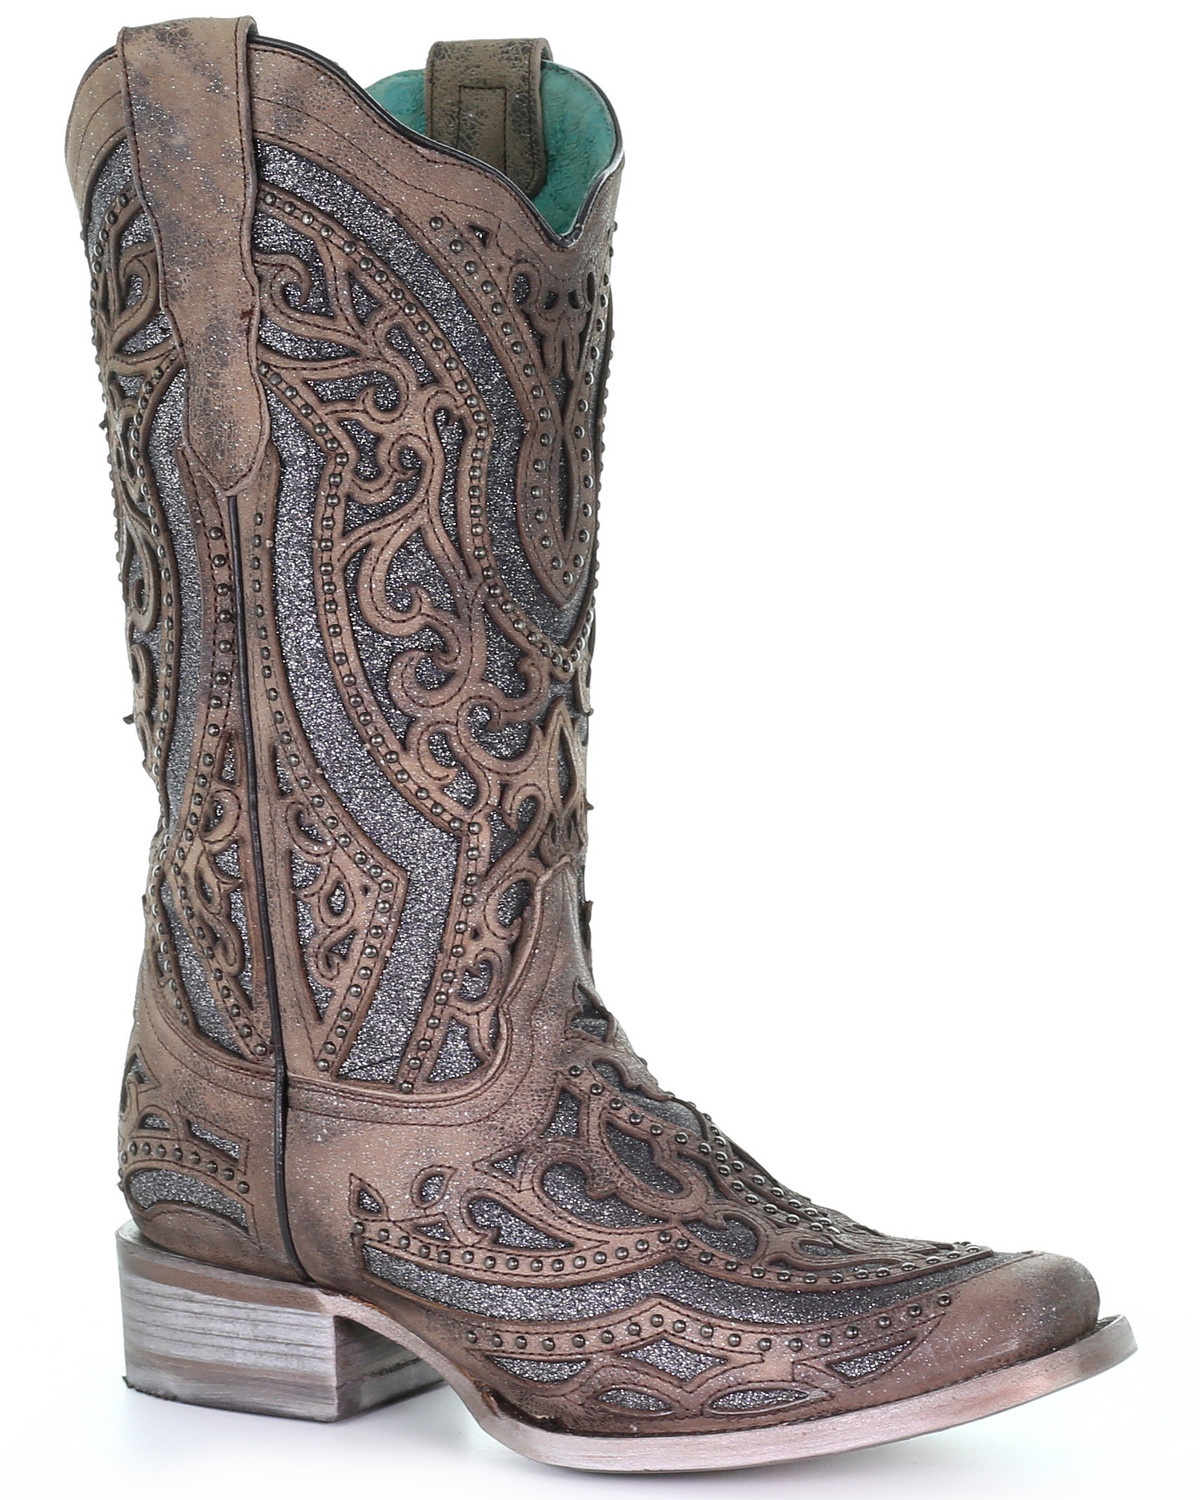 Corral Women's Brown Inlay & Flower Embroidery Western Boots - Square